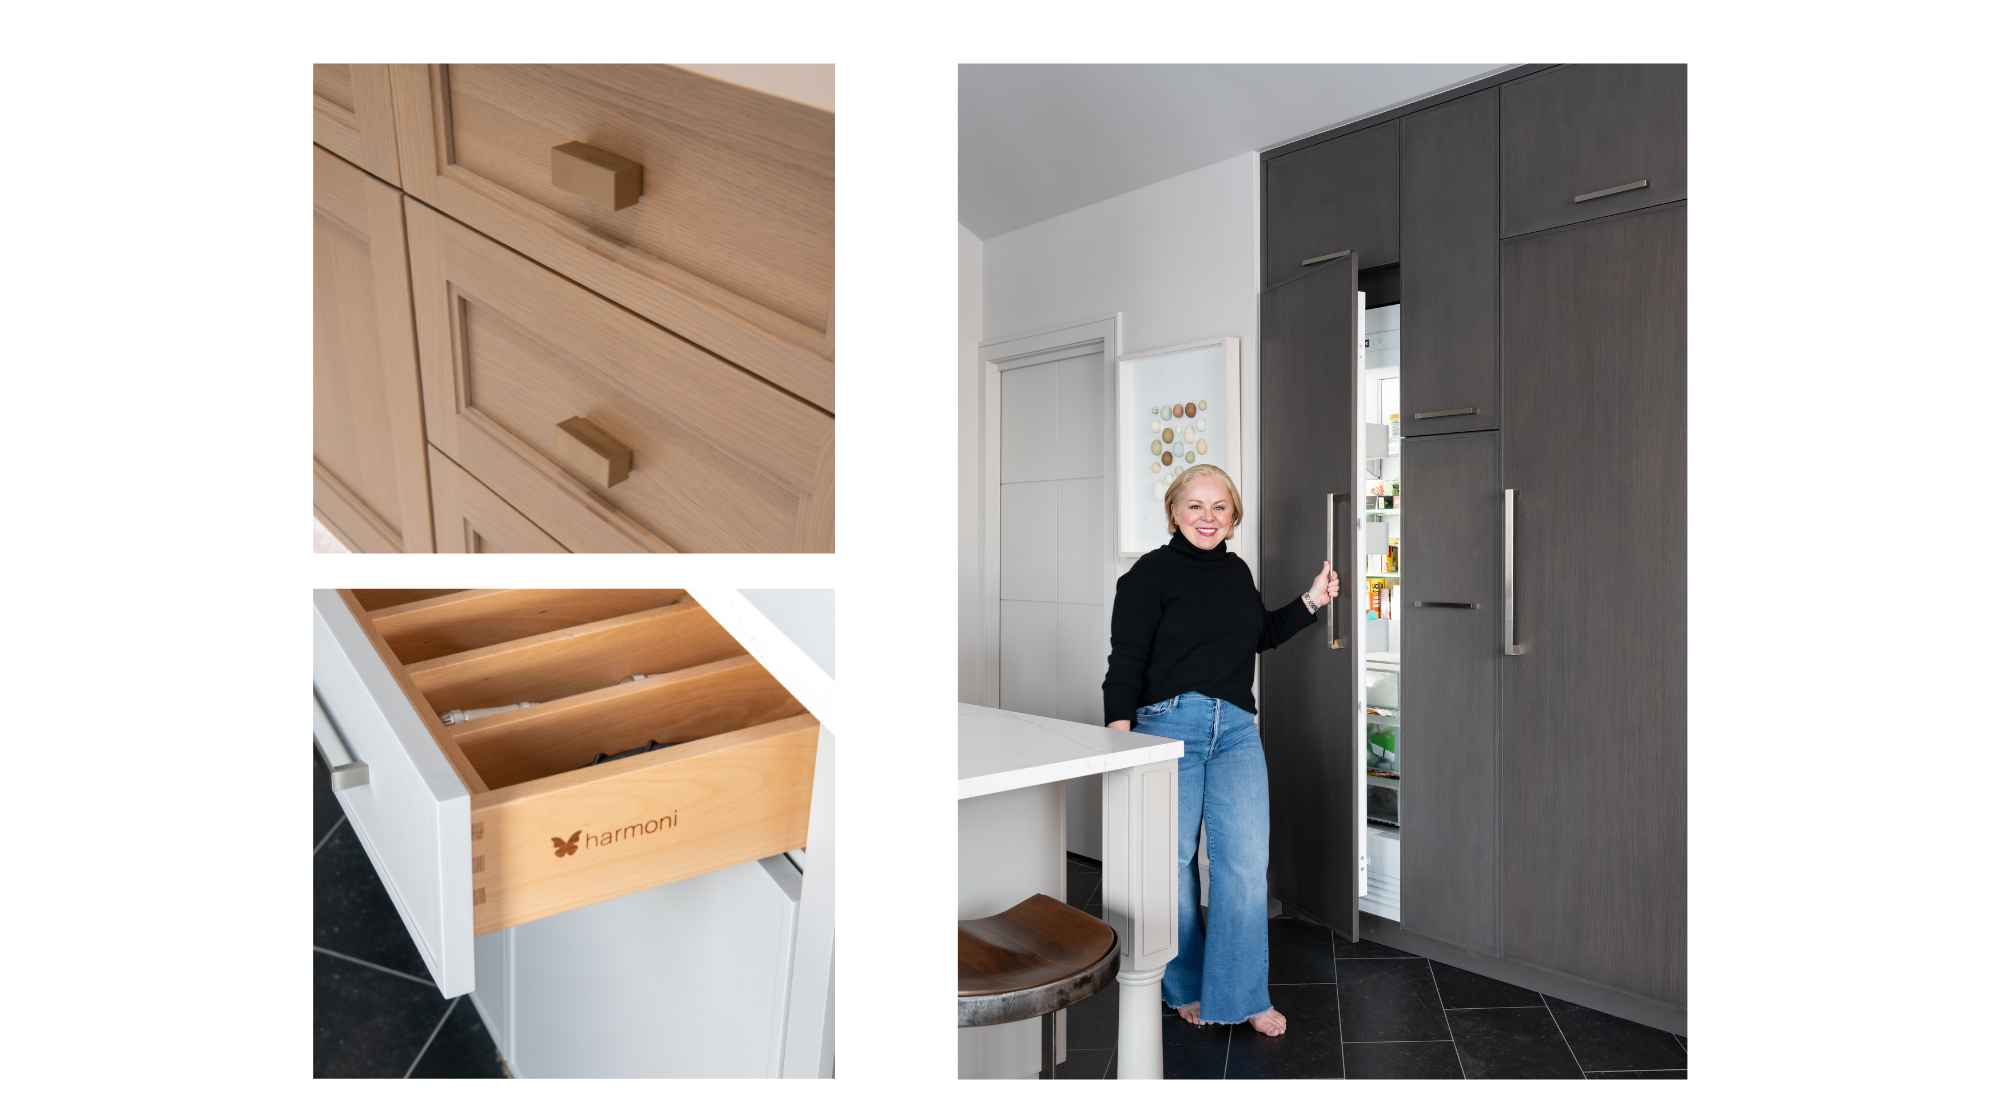 Laura selected Bentwood's Harmoni line for her kitchen and primary suite.